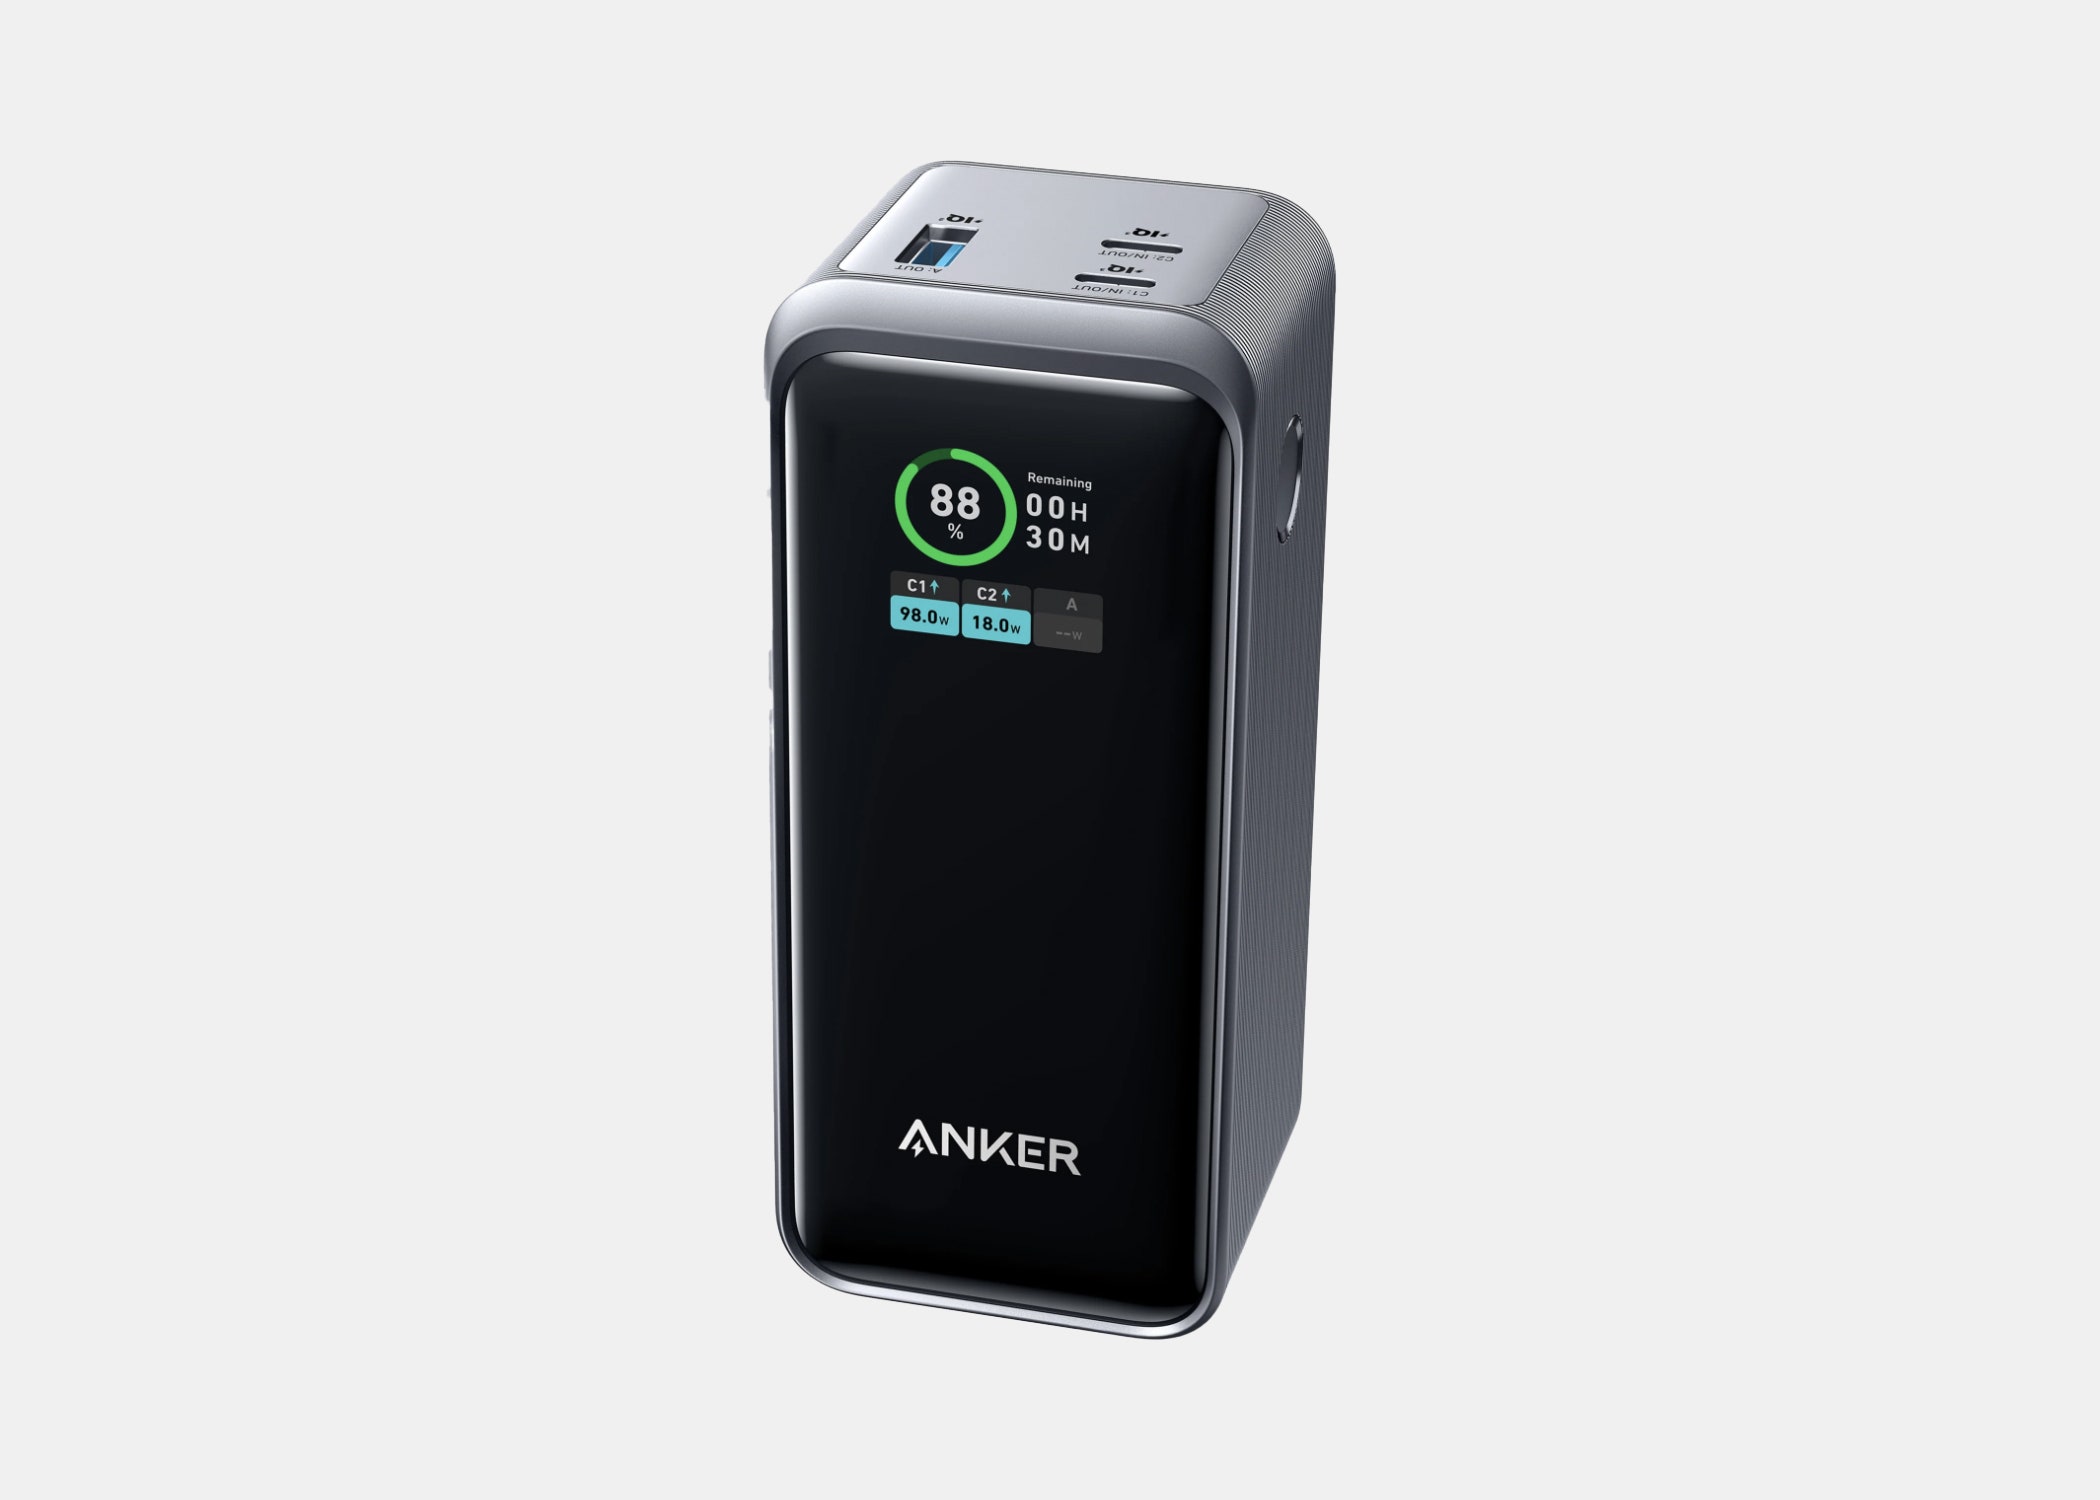 I love Anker products. I think they are intuitively designed and perfect for all travelers. I have a <a href="https://cna.st/affiliate-link/kDoCfXgWoowzcCrft4cjg269nX2GW9jBF5NB1VqCsMP9kpfnaLLc68P21ZW2fkGz2h7JBh3pvCP4cFbEWRyGnwwoyhHXrYUgWGcNiGFbsuaE33D957YeZfmUgsWwRk5txG2gyEKDyAns21VqhdhpCJqKfKCRPYwwJ3Ap1cqh3AccuMNy5fhpuTFQErais8q7UM4GtCg8noHt3Wz4QjX42AHb3vosQDeLb" rel="sponsored">portable charger by Anker</a> that I take with me everywhere I go. I have yet to try the power bank, but they seem like a fantastic investment. There have been numerous occasions where I’ve found a cozy cafe but had to leave because there were no outlets to charge my laptop. One of the most powerful power banks can charge a MacBook Pro 50 percent in just 28 minutes. $130, Amazon. <a href="https://www.amazon.com/Anker-Portable-Compatible-Charging-Included/dp/B0BYNZXFM2/ref=sr_1_1_sspa?">Get it now!</a><p>Sign up to receive the latest news, expert tips, and inspiration on all things travel</p><a href="https://www.cntraveler.com/newsletter/the-daily?sourceCode=msnsend">Inspire Me</a>